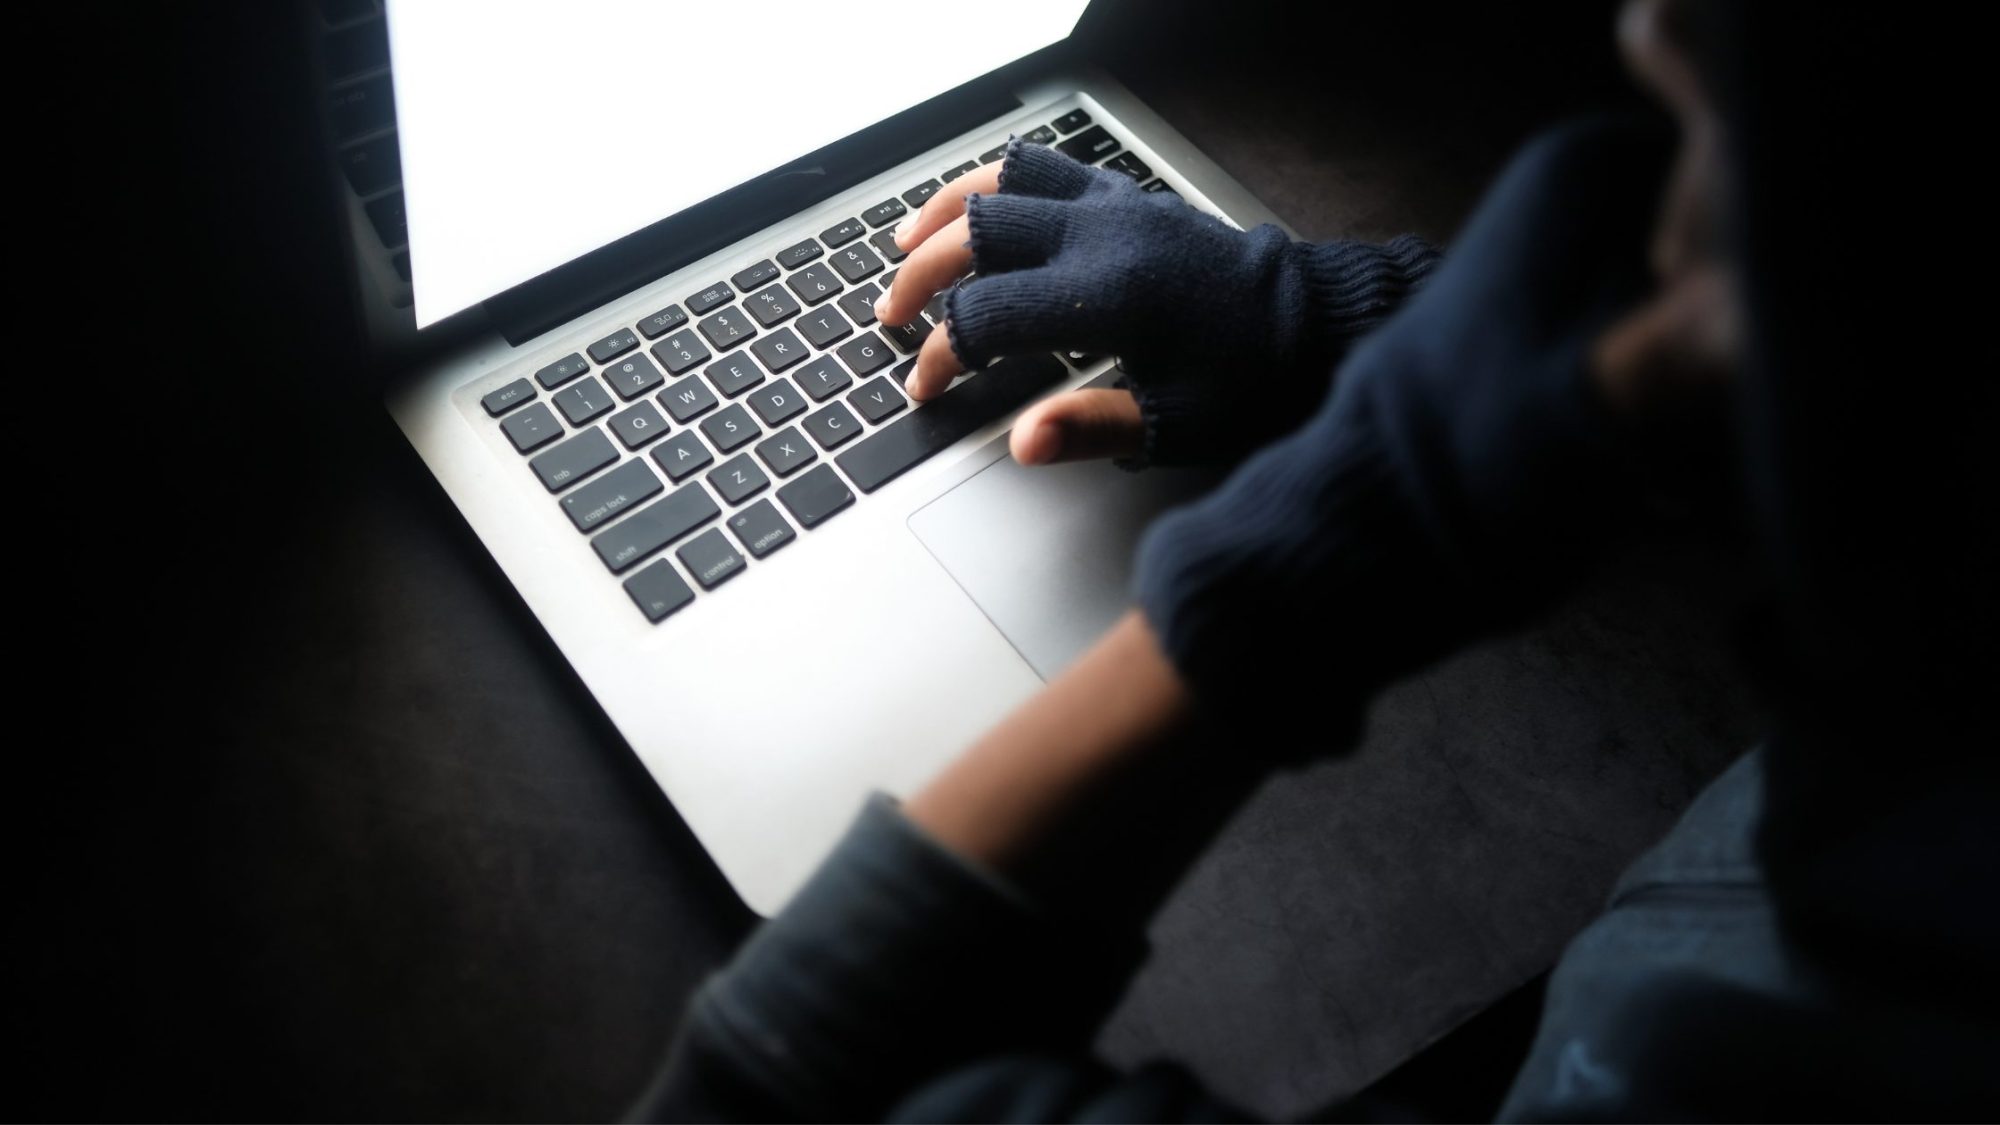 A person wearing fingerless gloves is typing on a laptop in a dimly lit environment, clearly immersed in cybersecurity operations.